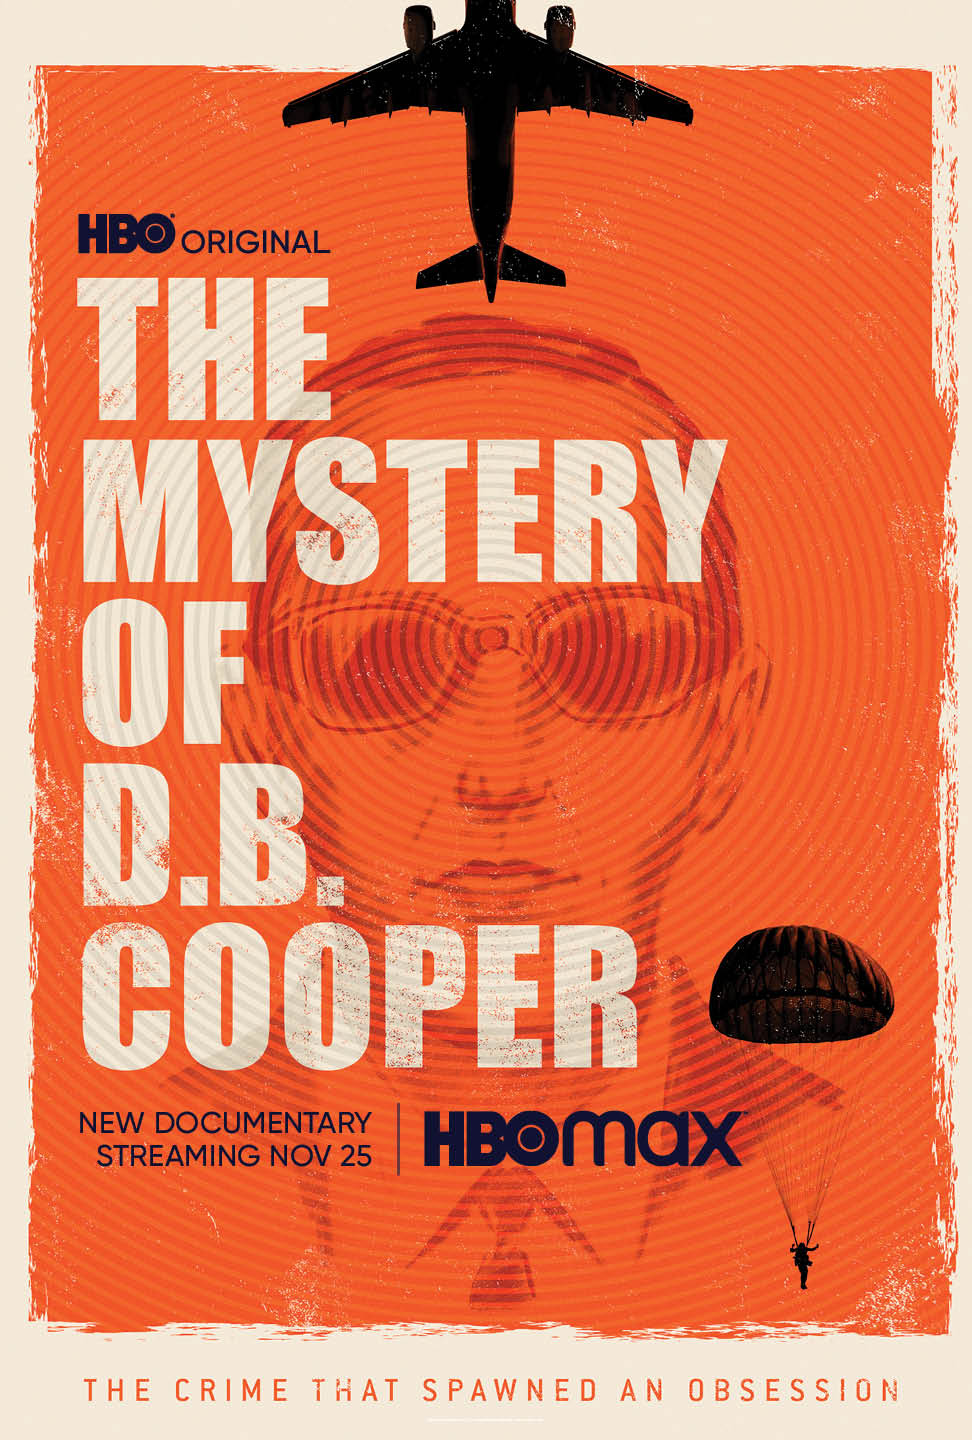 Extra Large TV Poster Image for The Mystery of D.B. Cooper 